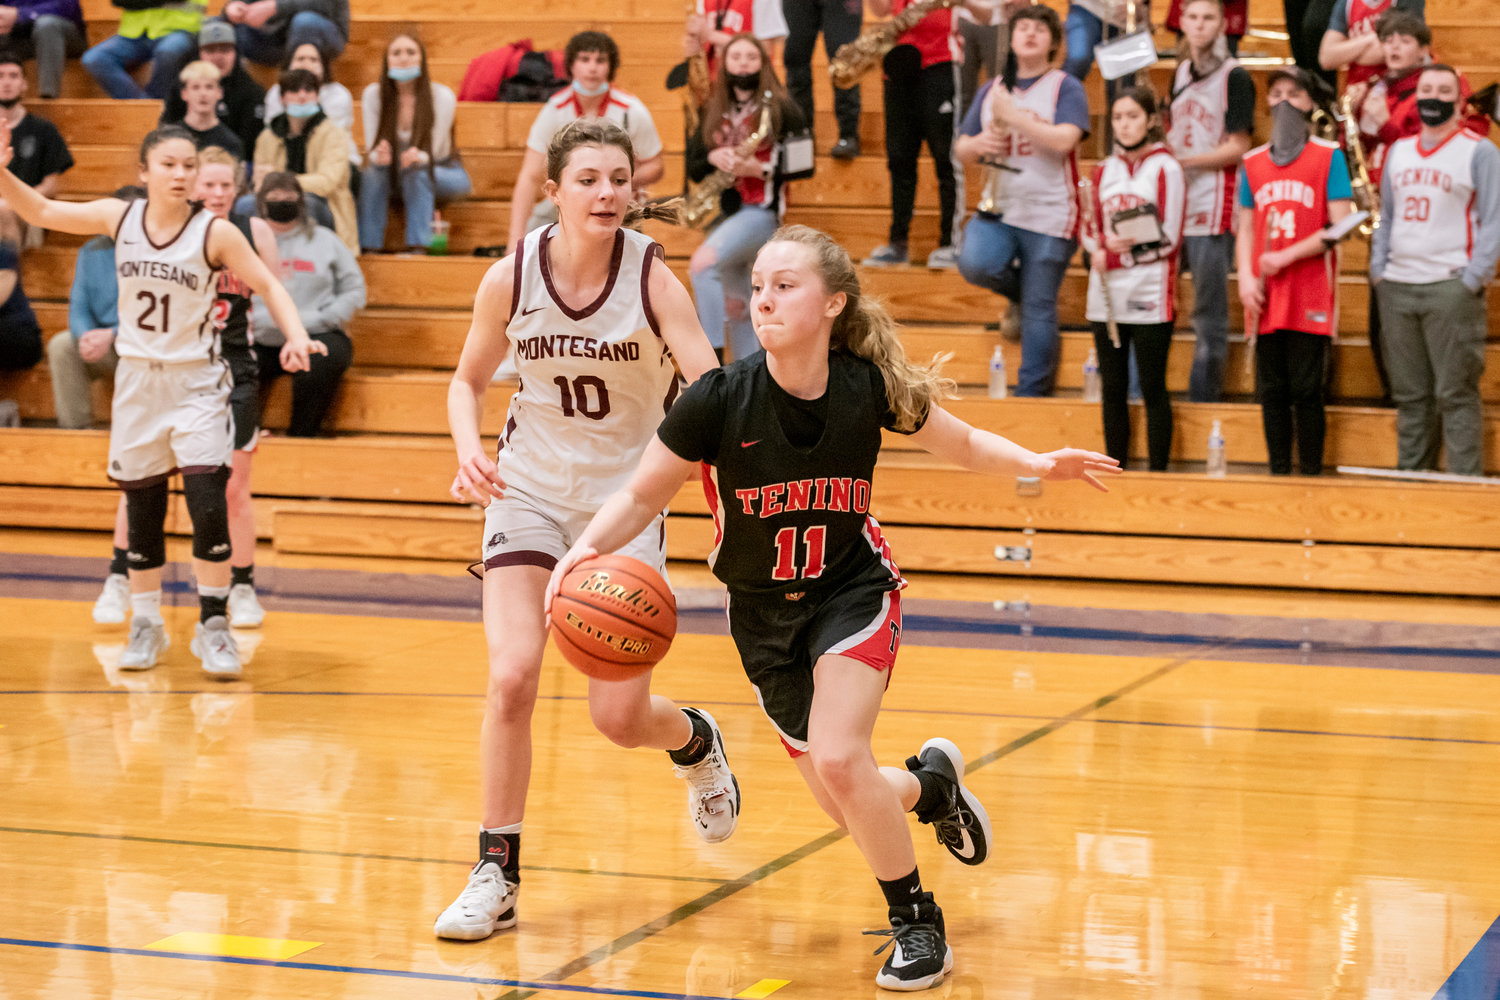 Tenino’s Megan Letts (11) drives in with the ball on Montesano defenders during a game Saturday at Rochester High School.